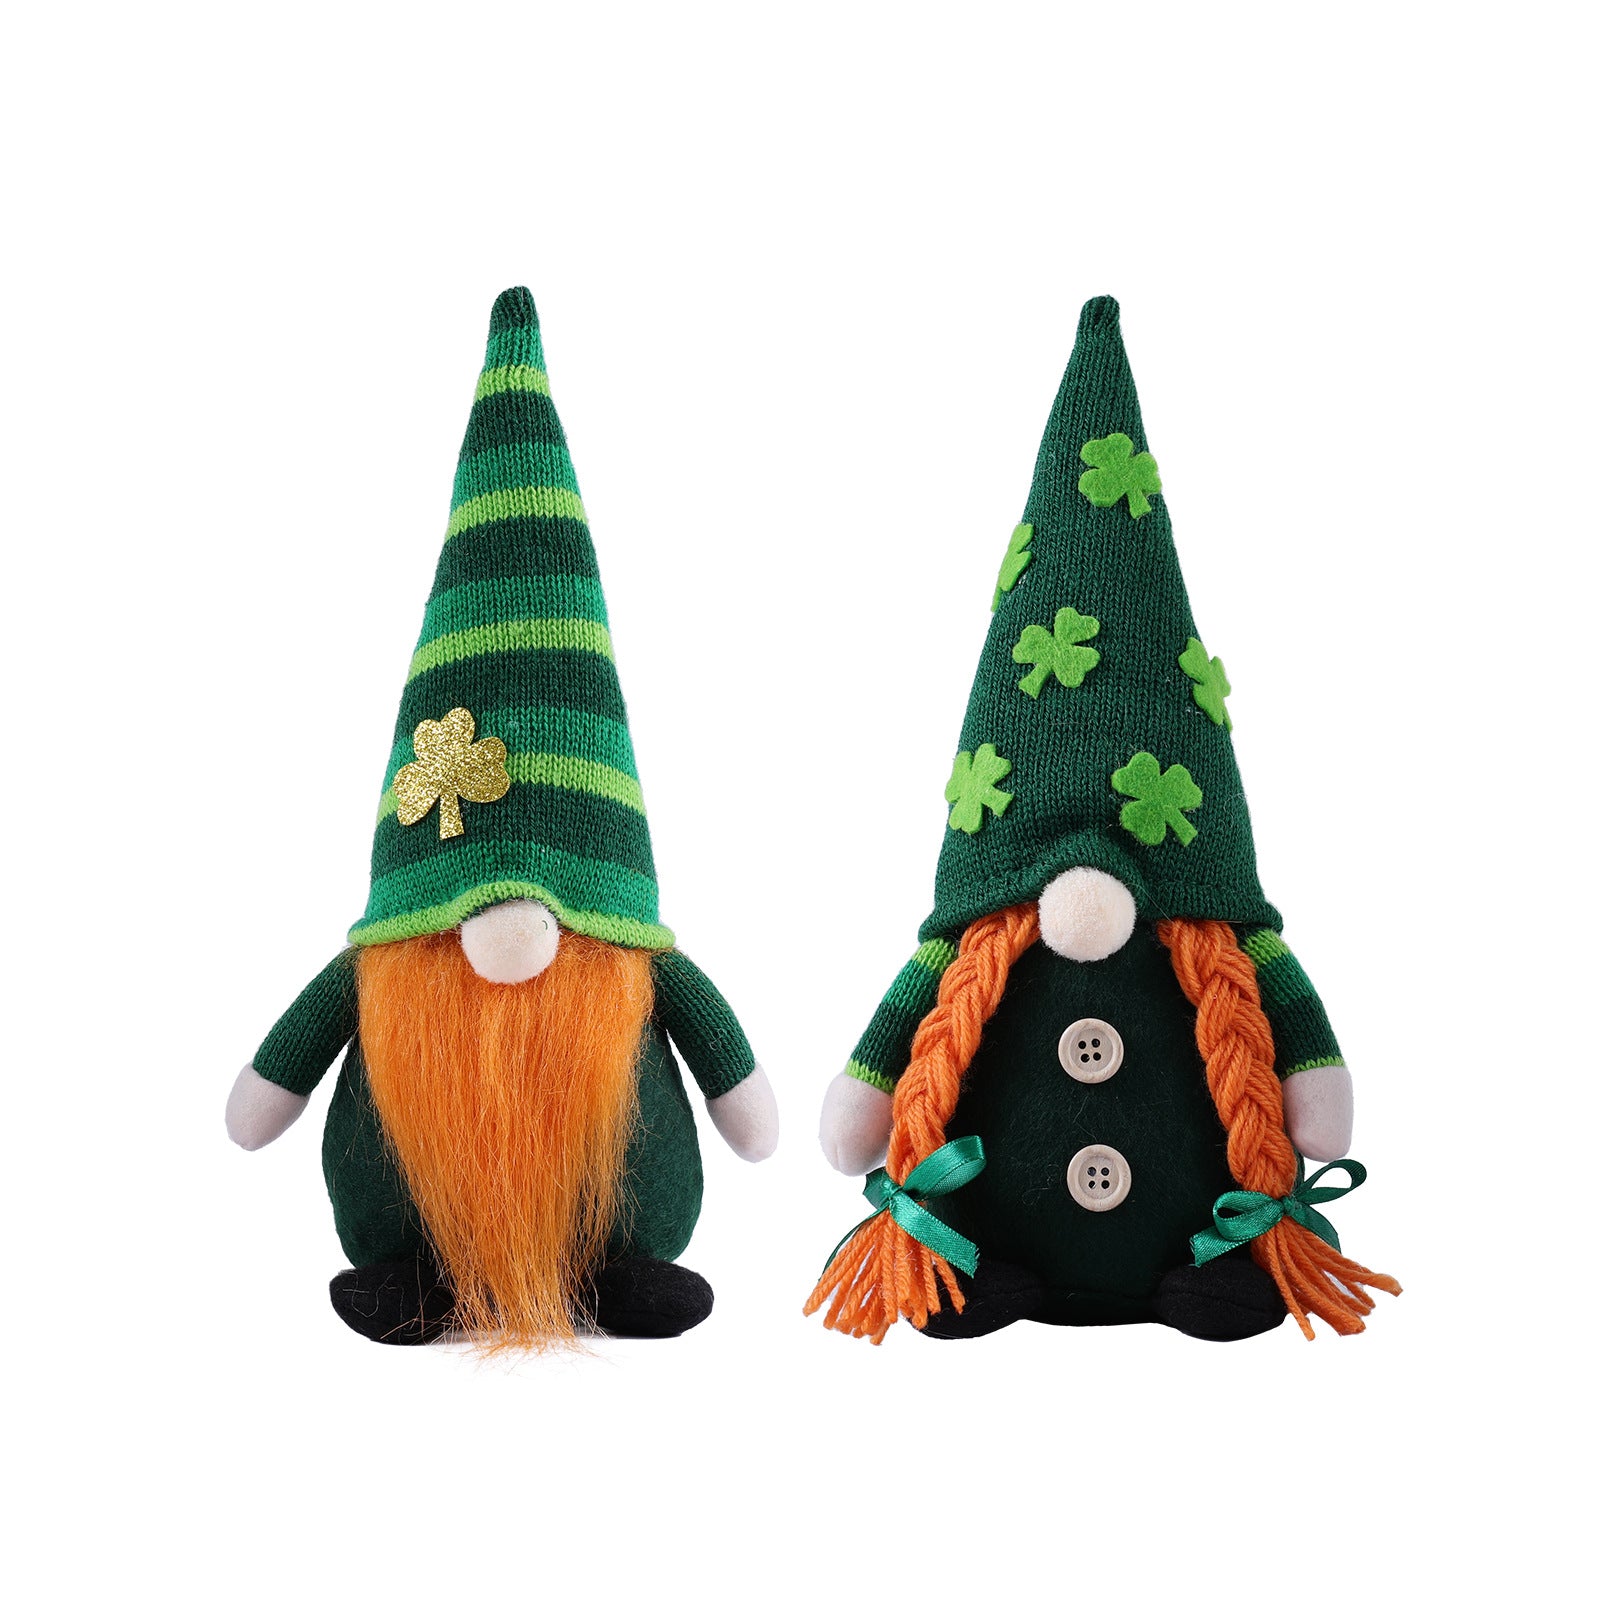 Here We Have Various St. Patrick's Day Gnomes To Sale, St. Patrick's day Handmade Gnomes, st Patricks Gnome Decor Aldi, St Patricks Gnome Decor, Leprechaun gnome, St Patrick gnome, Gnome st Patrick's day, st patty's day gnome, St Patrick's day gnome DIY, St patty gnomes, Happy st Patrick's day gnome